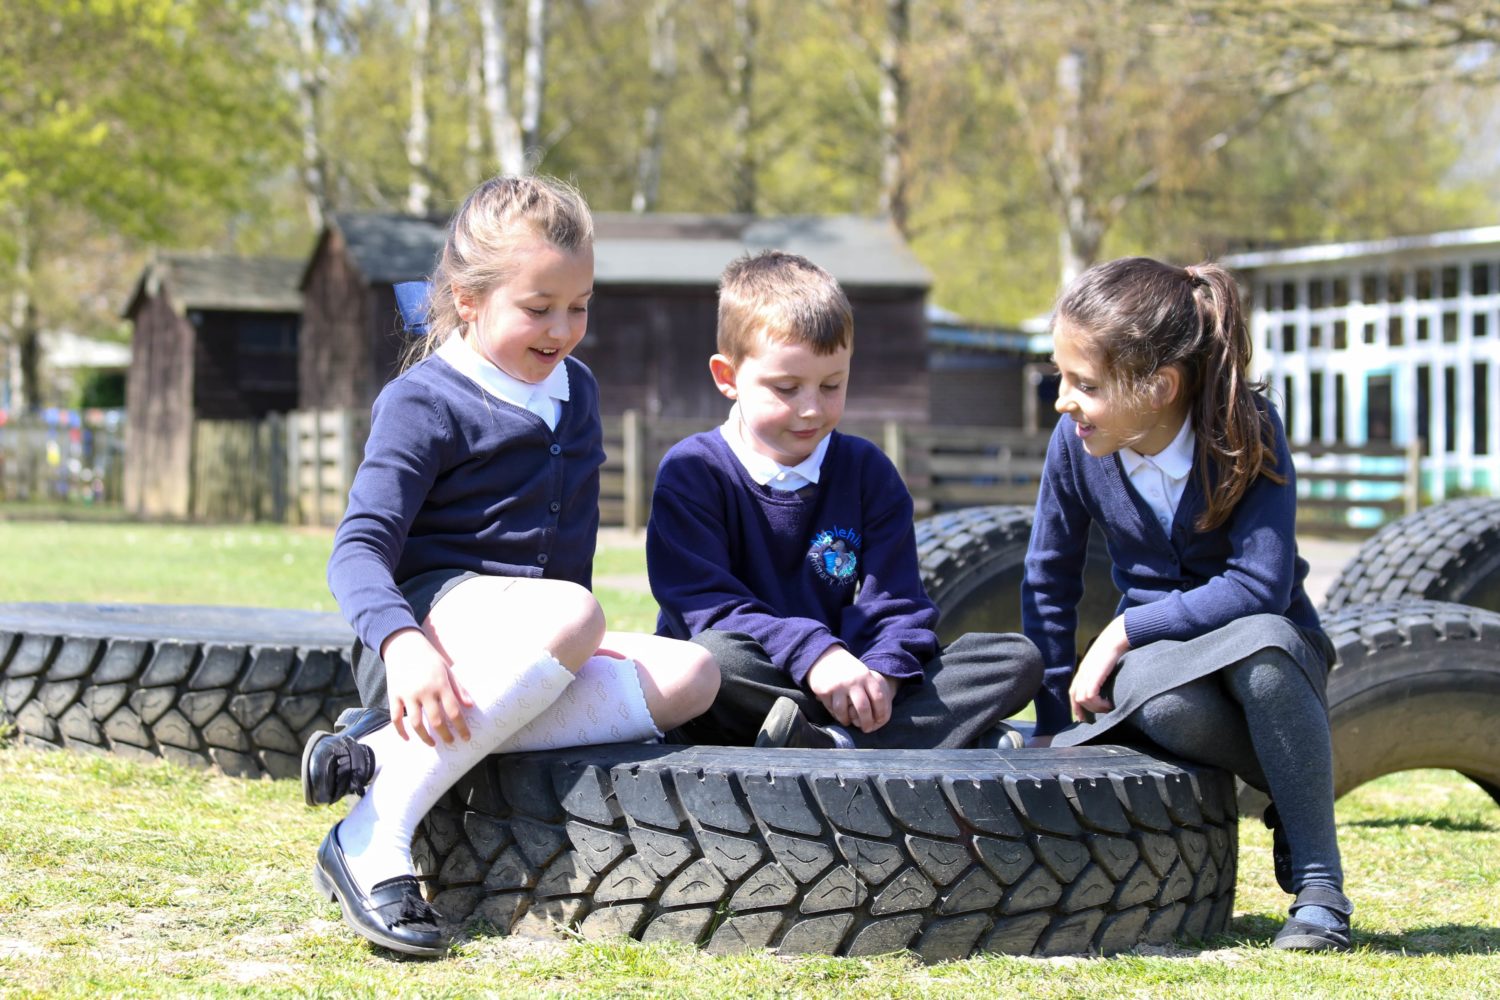 Three students sat on a tyre